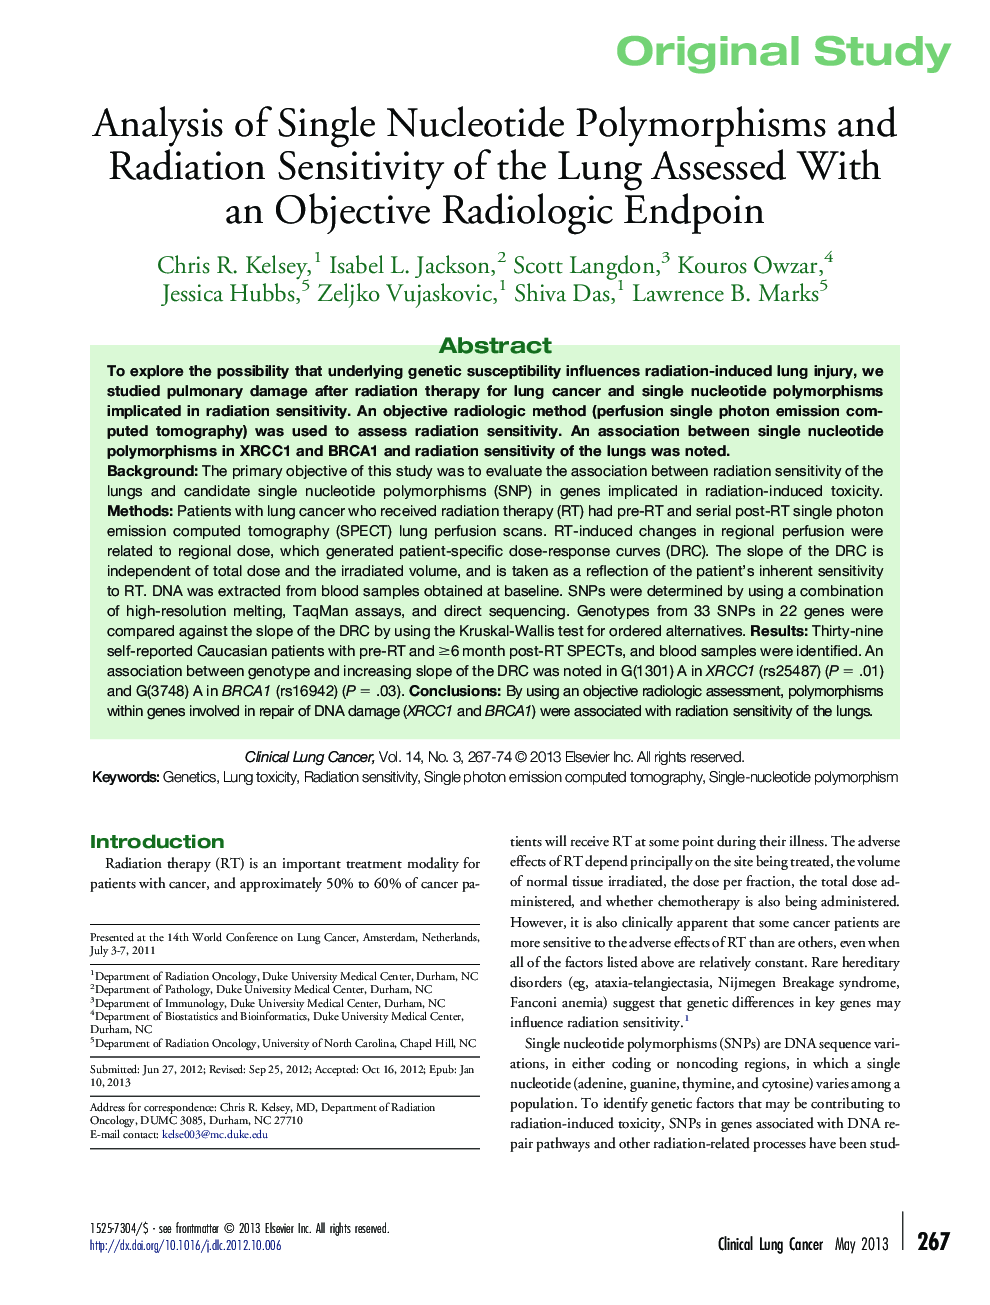 Analysis of Single Nucleotide Polymorphisms and Radiation Sensitivity of the Lung Assessed With an Objective Radiologic Endpoin